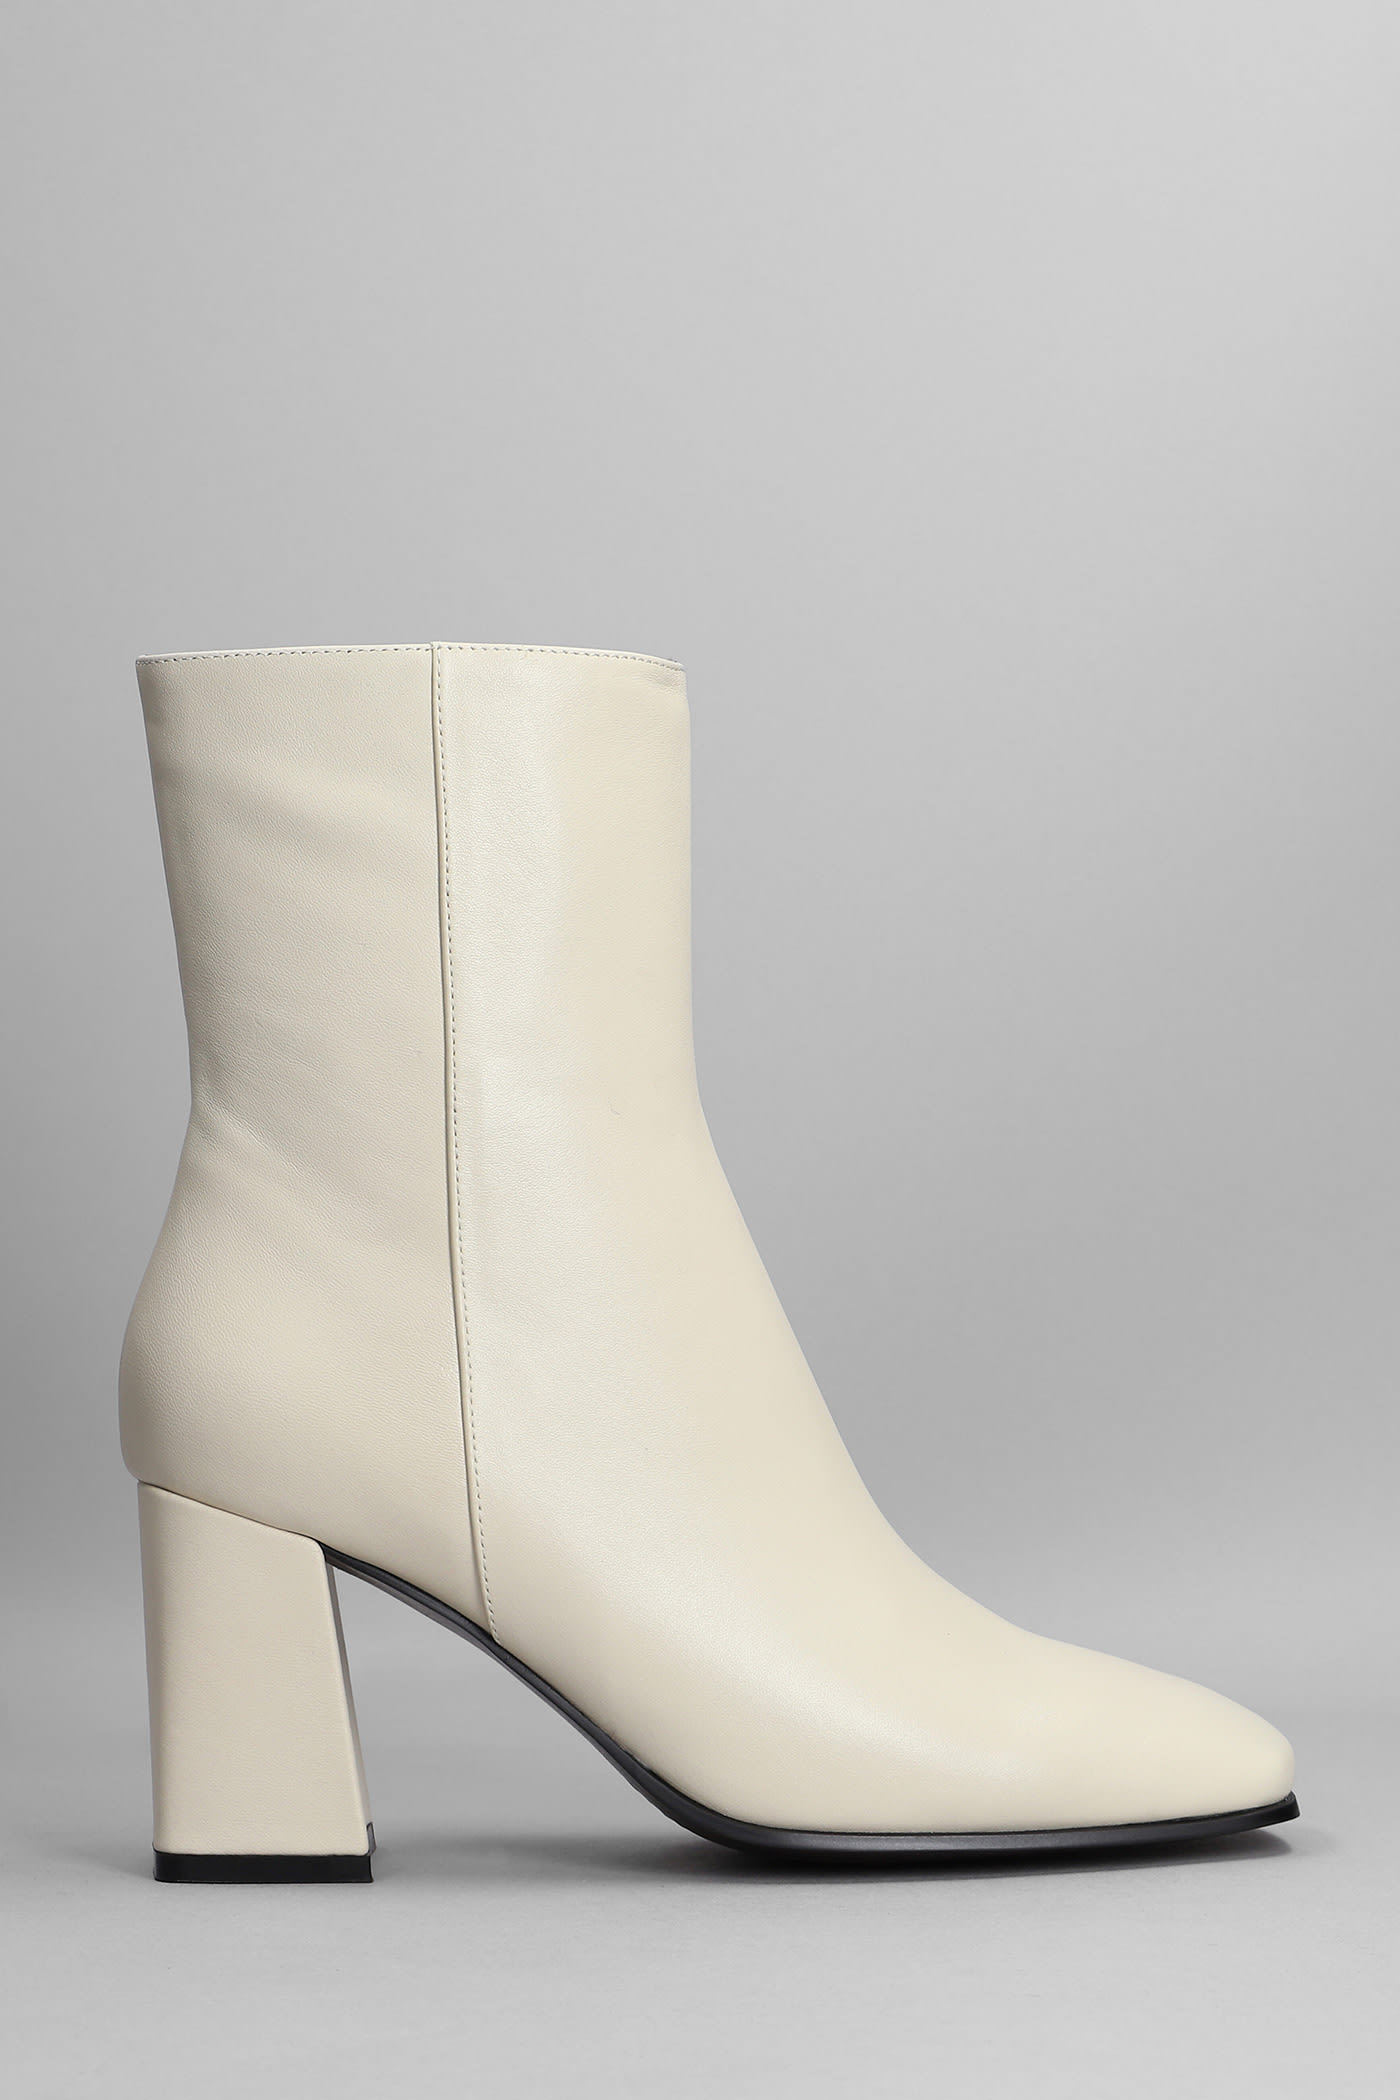 Bibi Lou High Heels Ankle Boots In Beige Leather